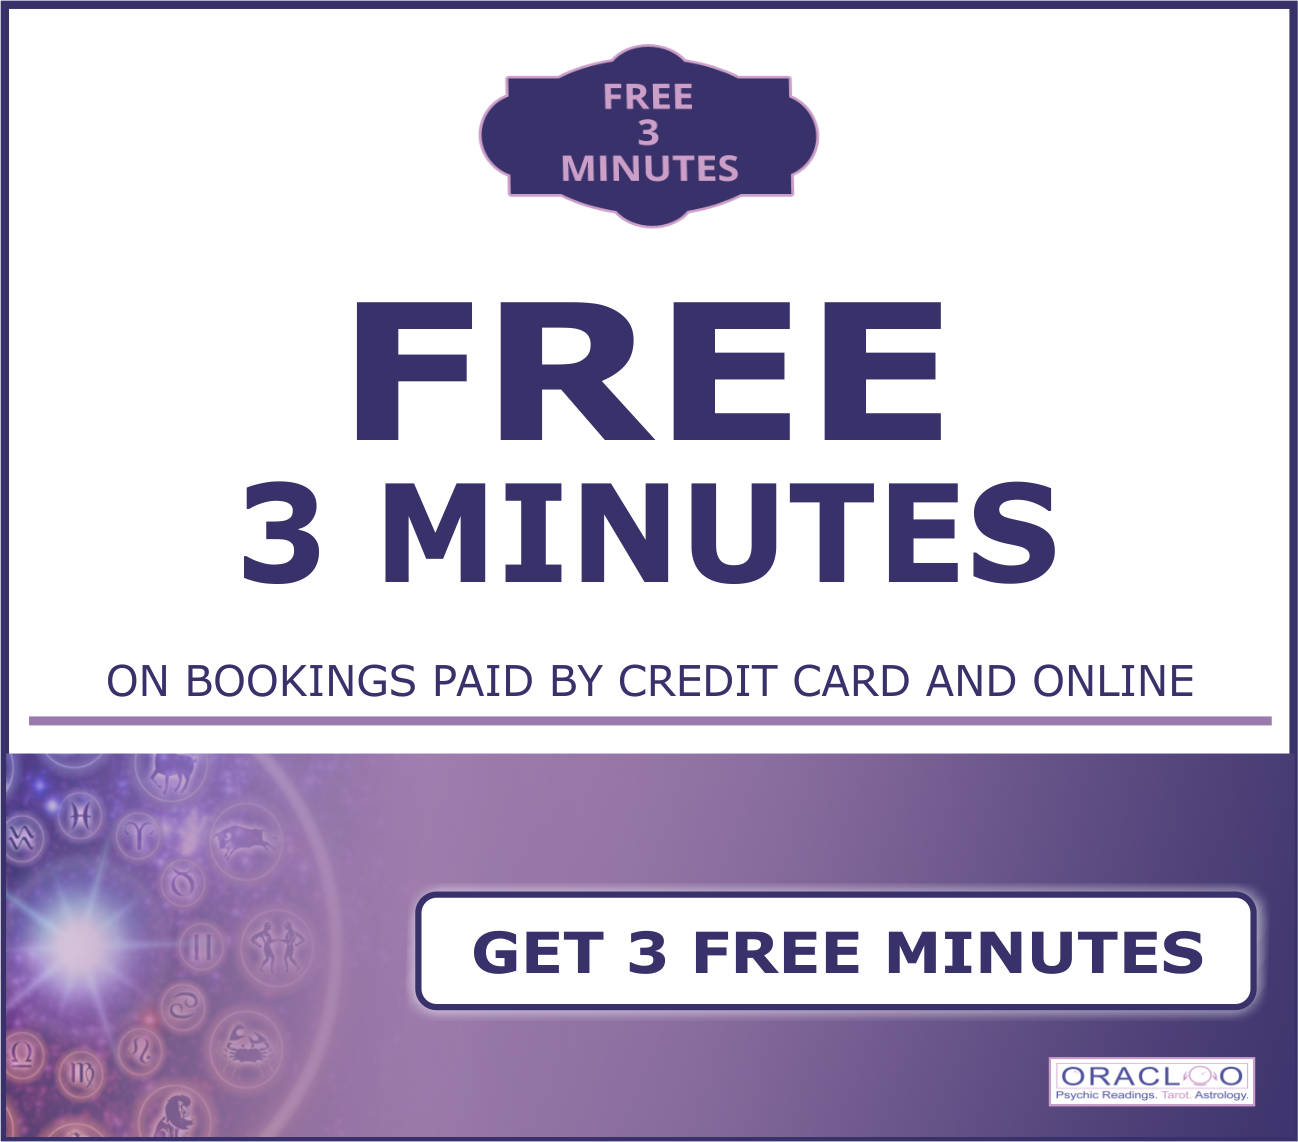 Free 3 Minutes Promotion